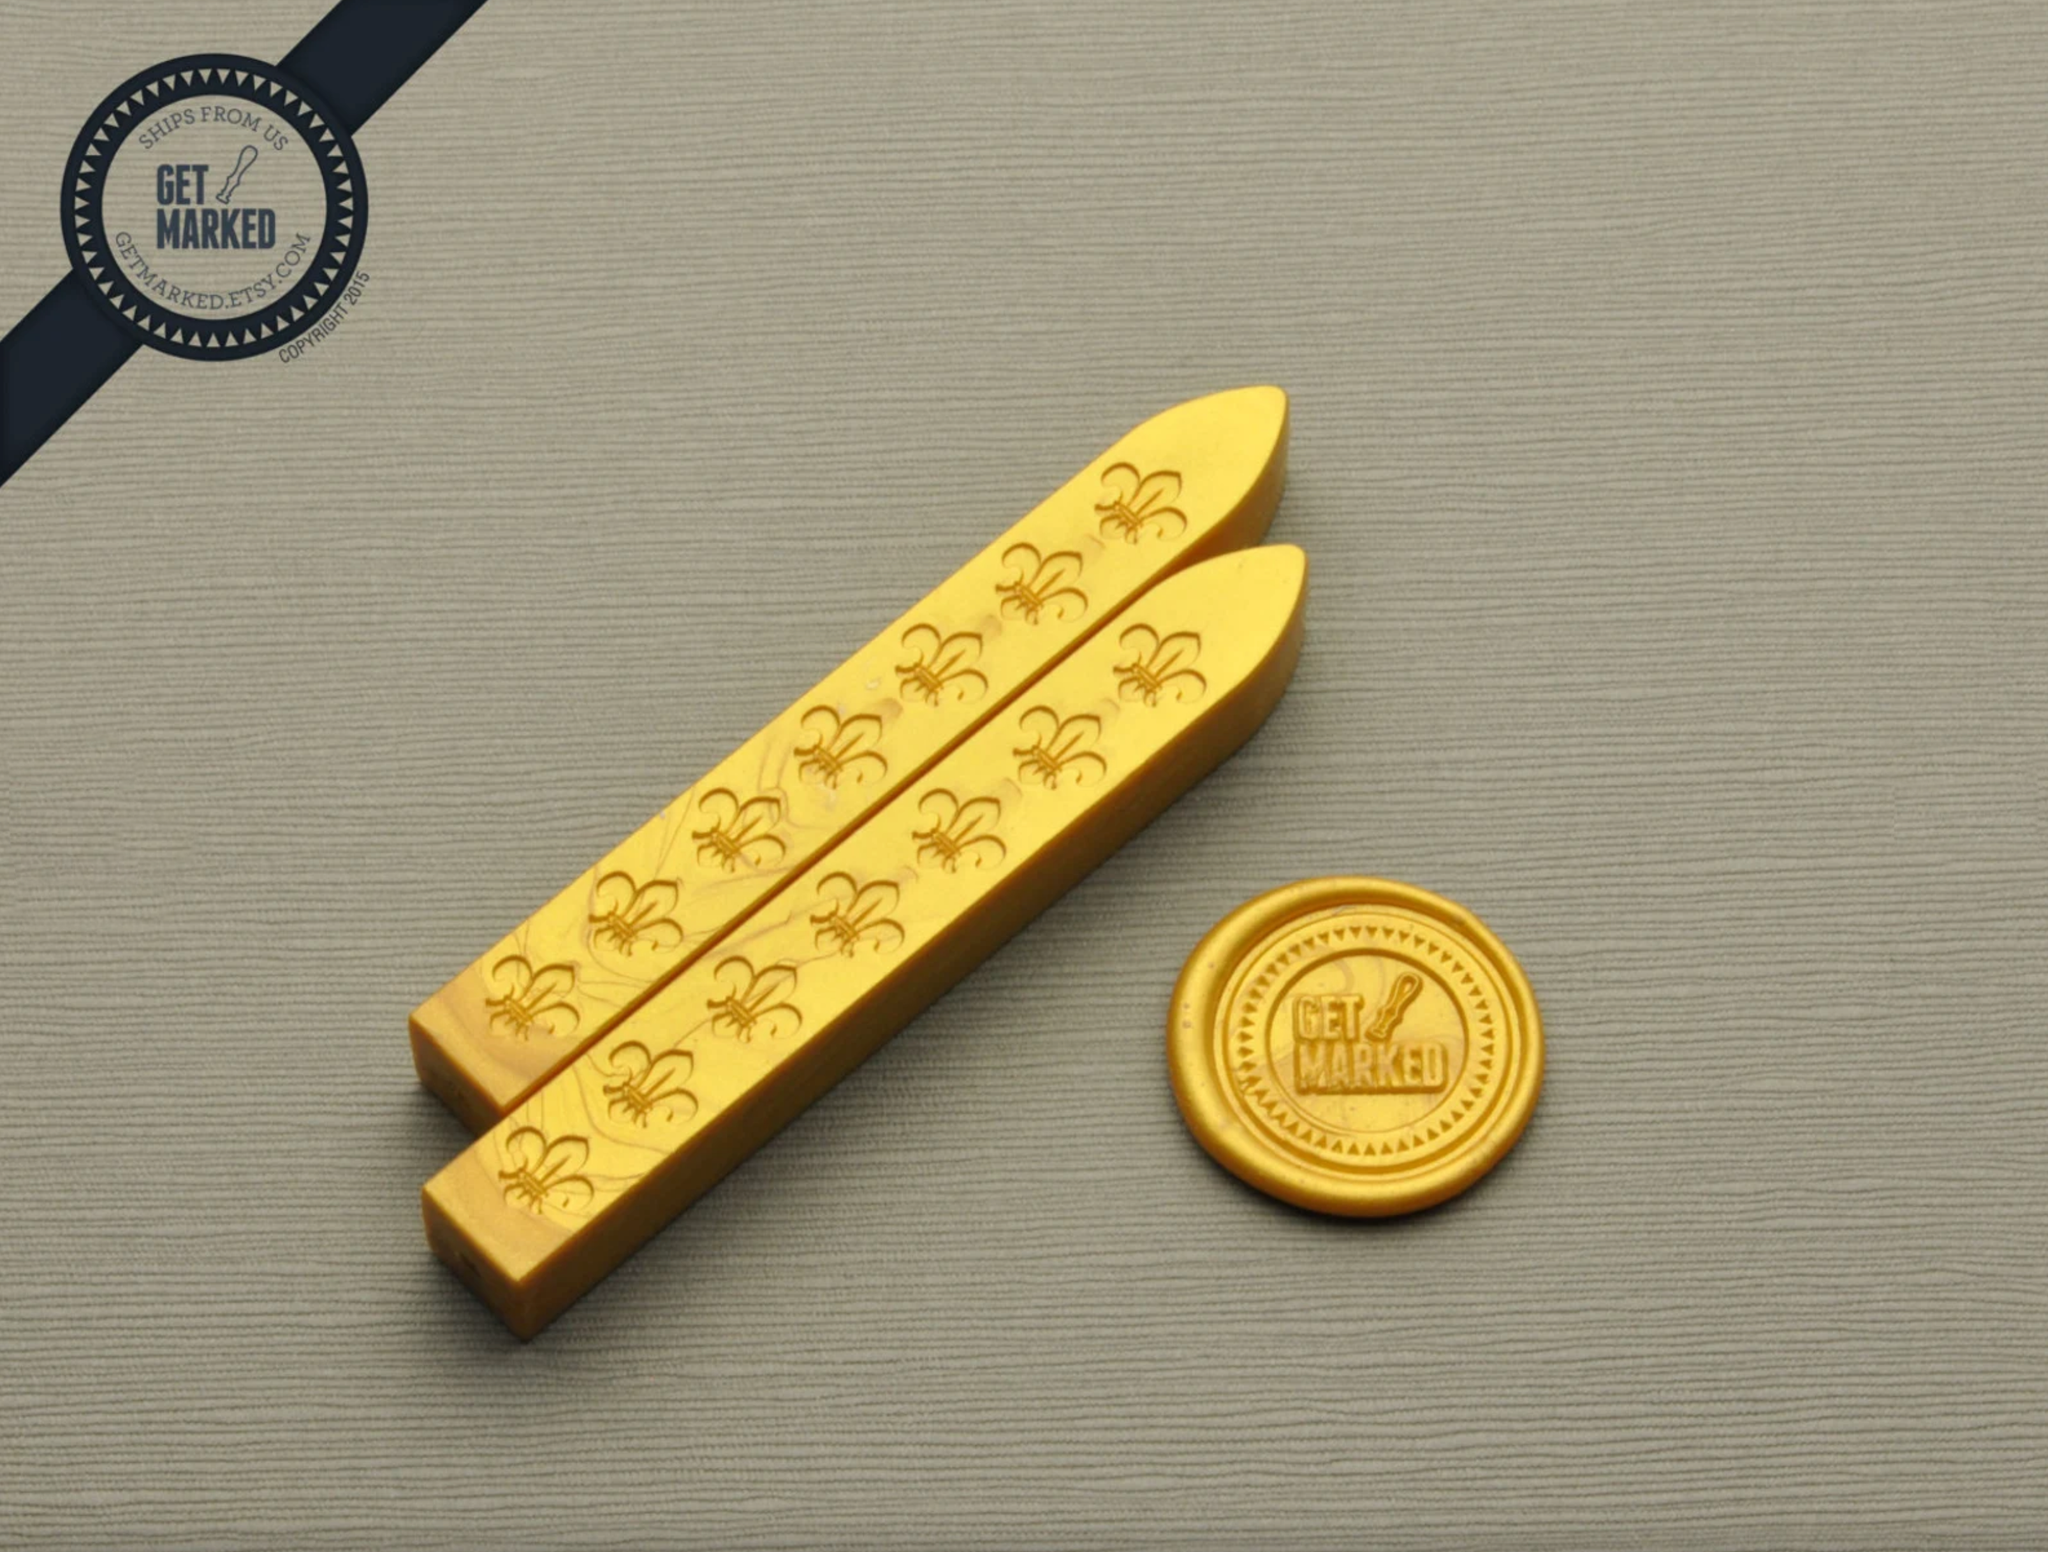 2 Pieces MIDAS GOLD Non-Wicked Wax Stick for Sealing Wax Stamping